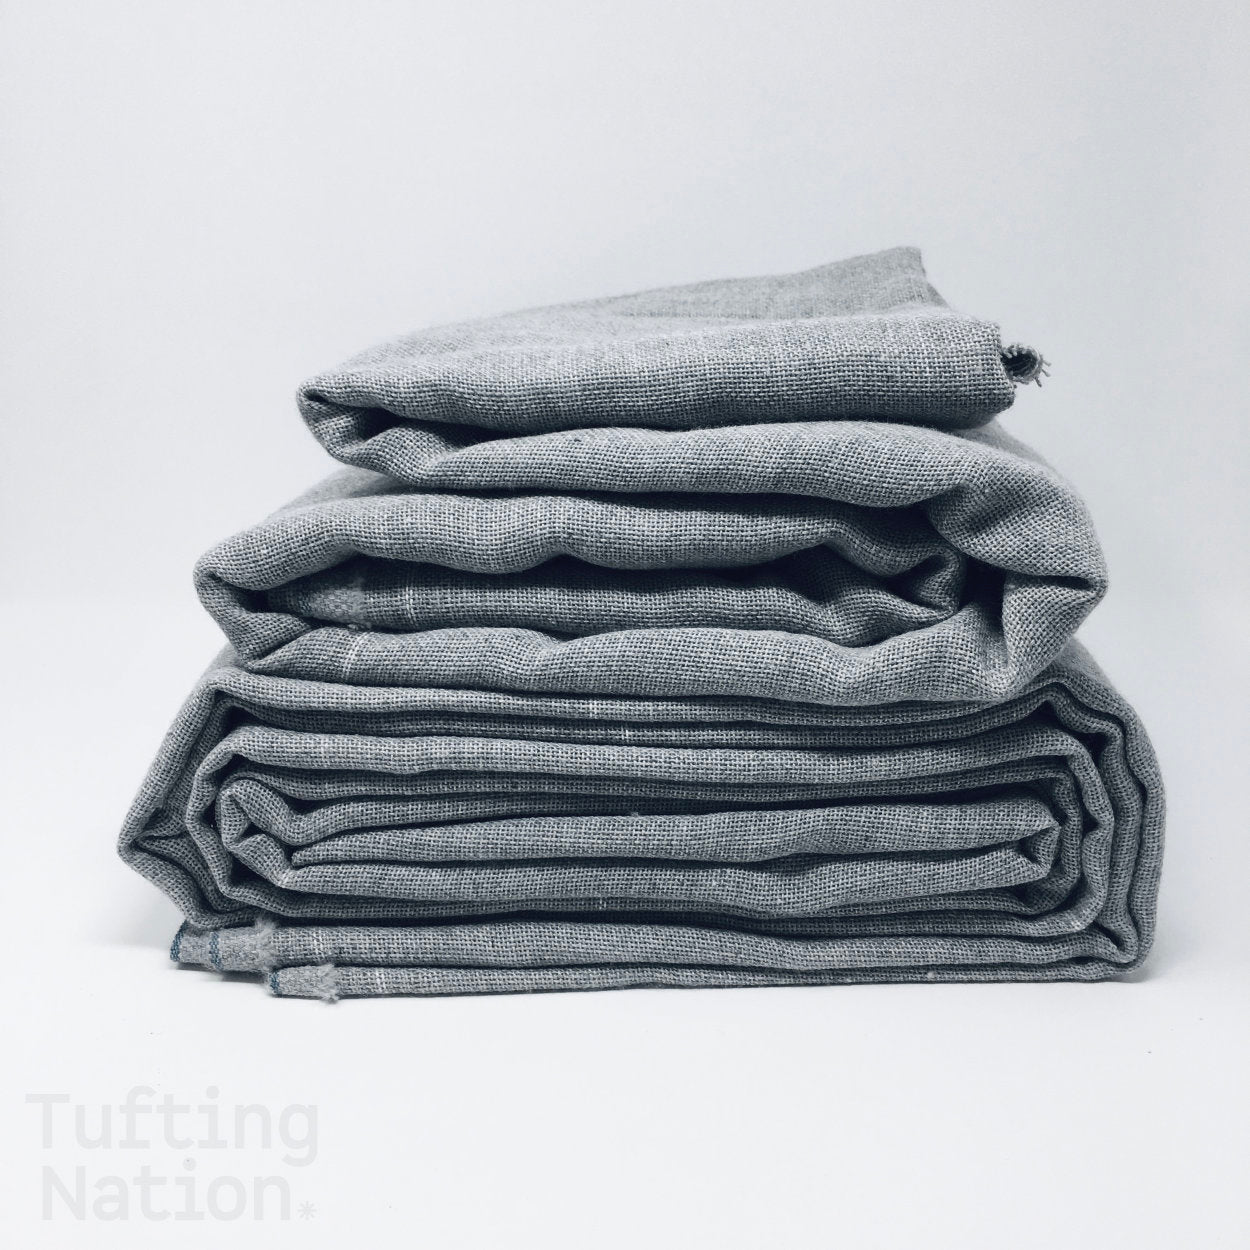 Tufting Material for Rug Making | TuftingNation